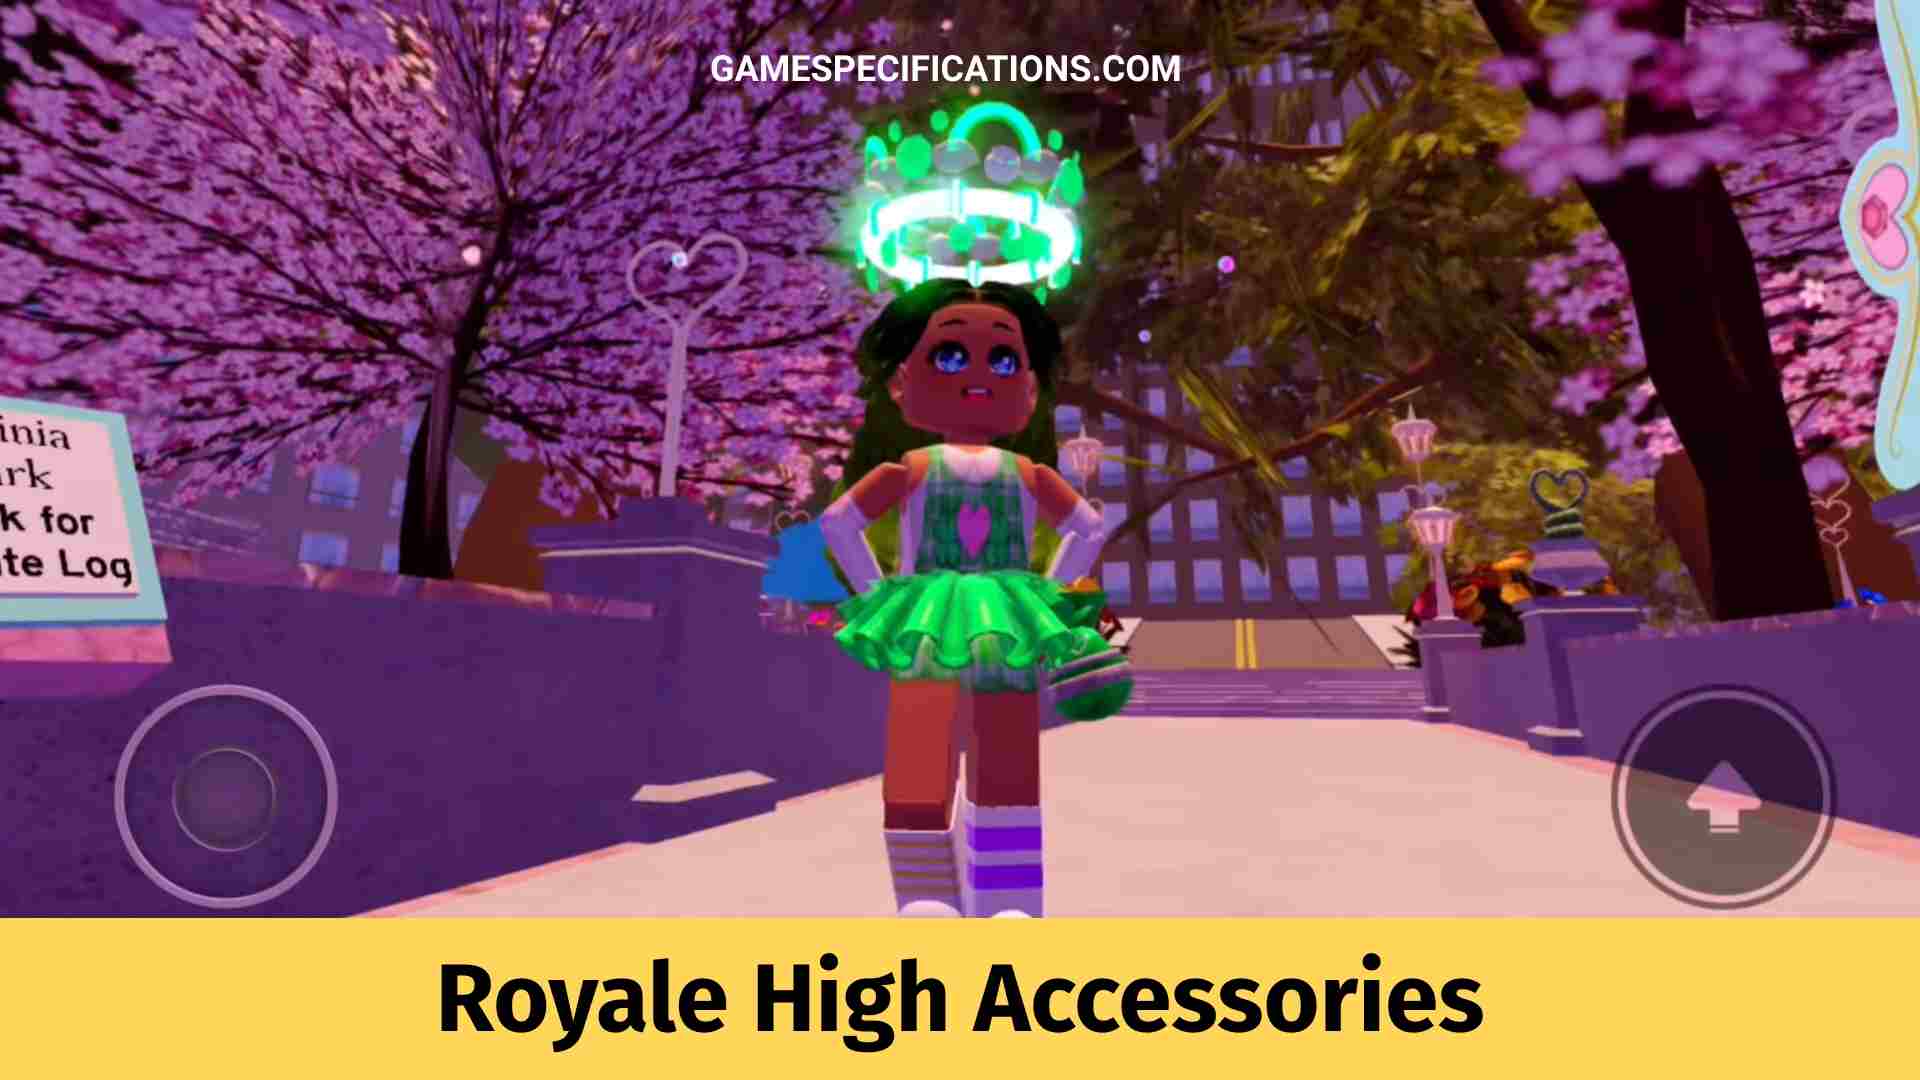 21 Underrated Royale High Accessories For Aesthetic Gamers Game Specifications